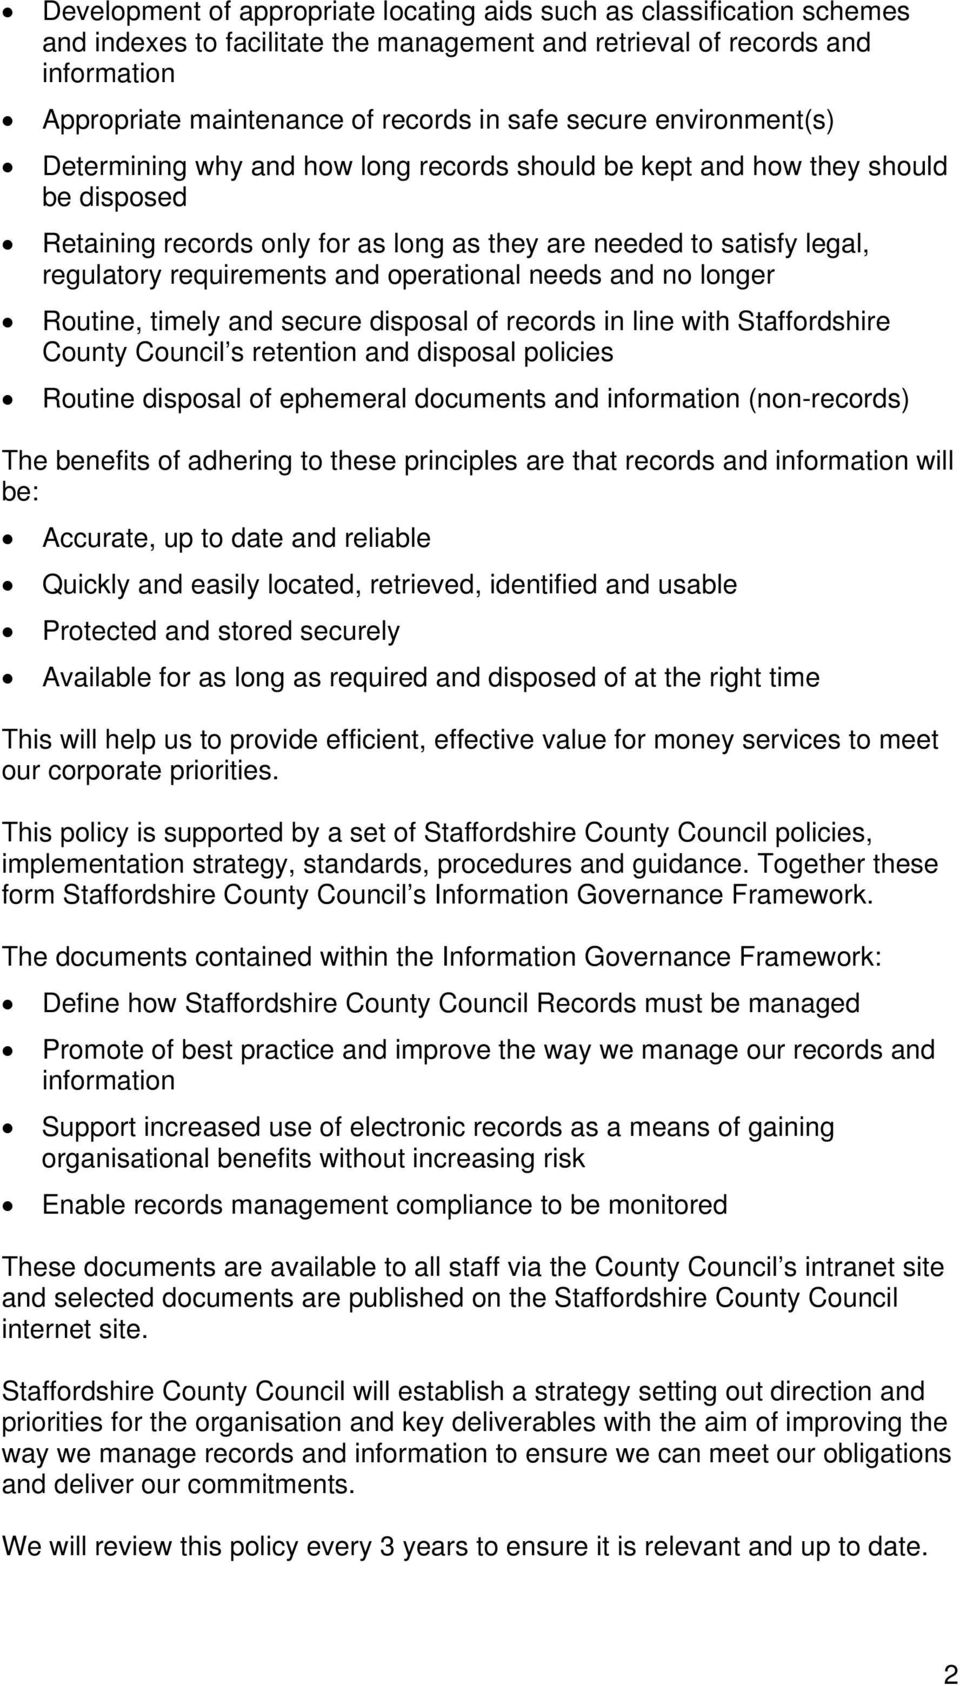 requirements and operational needs and no longer Routine, timely and secure disposal of records in line with Staffordshire County Council s retention and disposal policies Routine disposal of